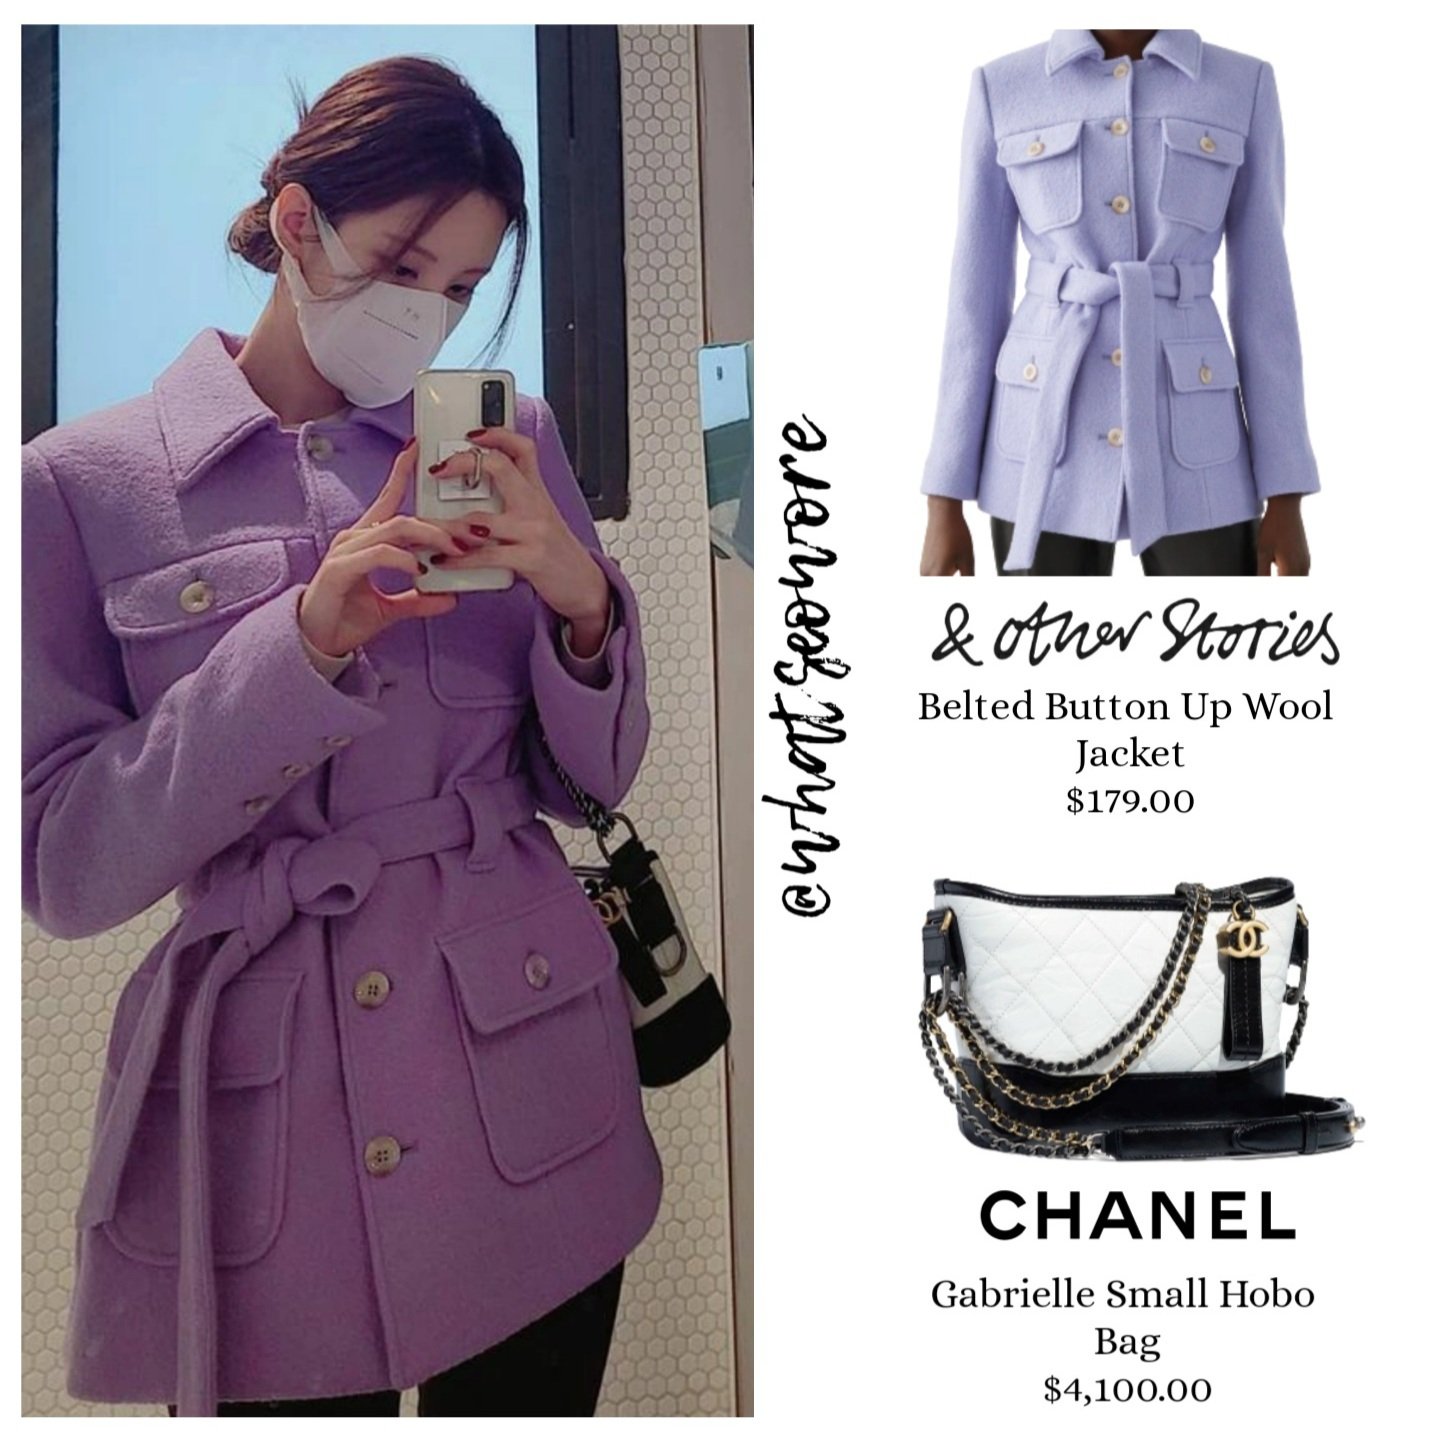 𝐰𝐡𝐚𝐭𝐬𝐞𝐨𝐰𝐨𝐫𝐞 on X: On Seo Juhyun • & Other Stories Belted Button  Up Wool Jacket, $179.00. • Chanel Gabrielle Small Hobo Bag, $4,100.00. (As  seen on Seo Juhyun's Instagram Post 201220)  #